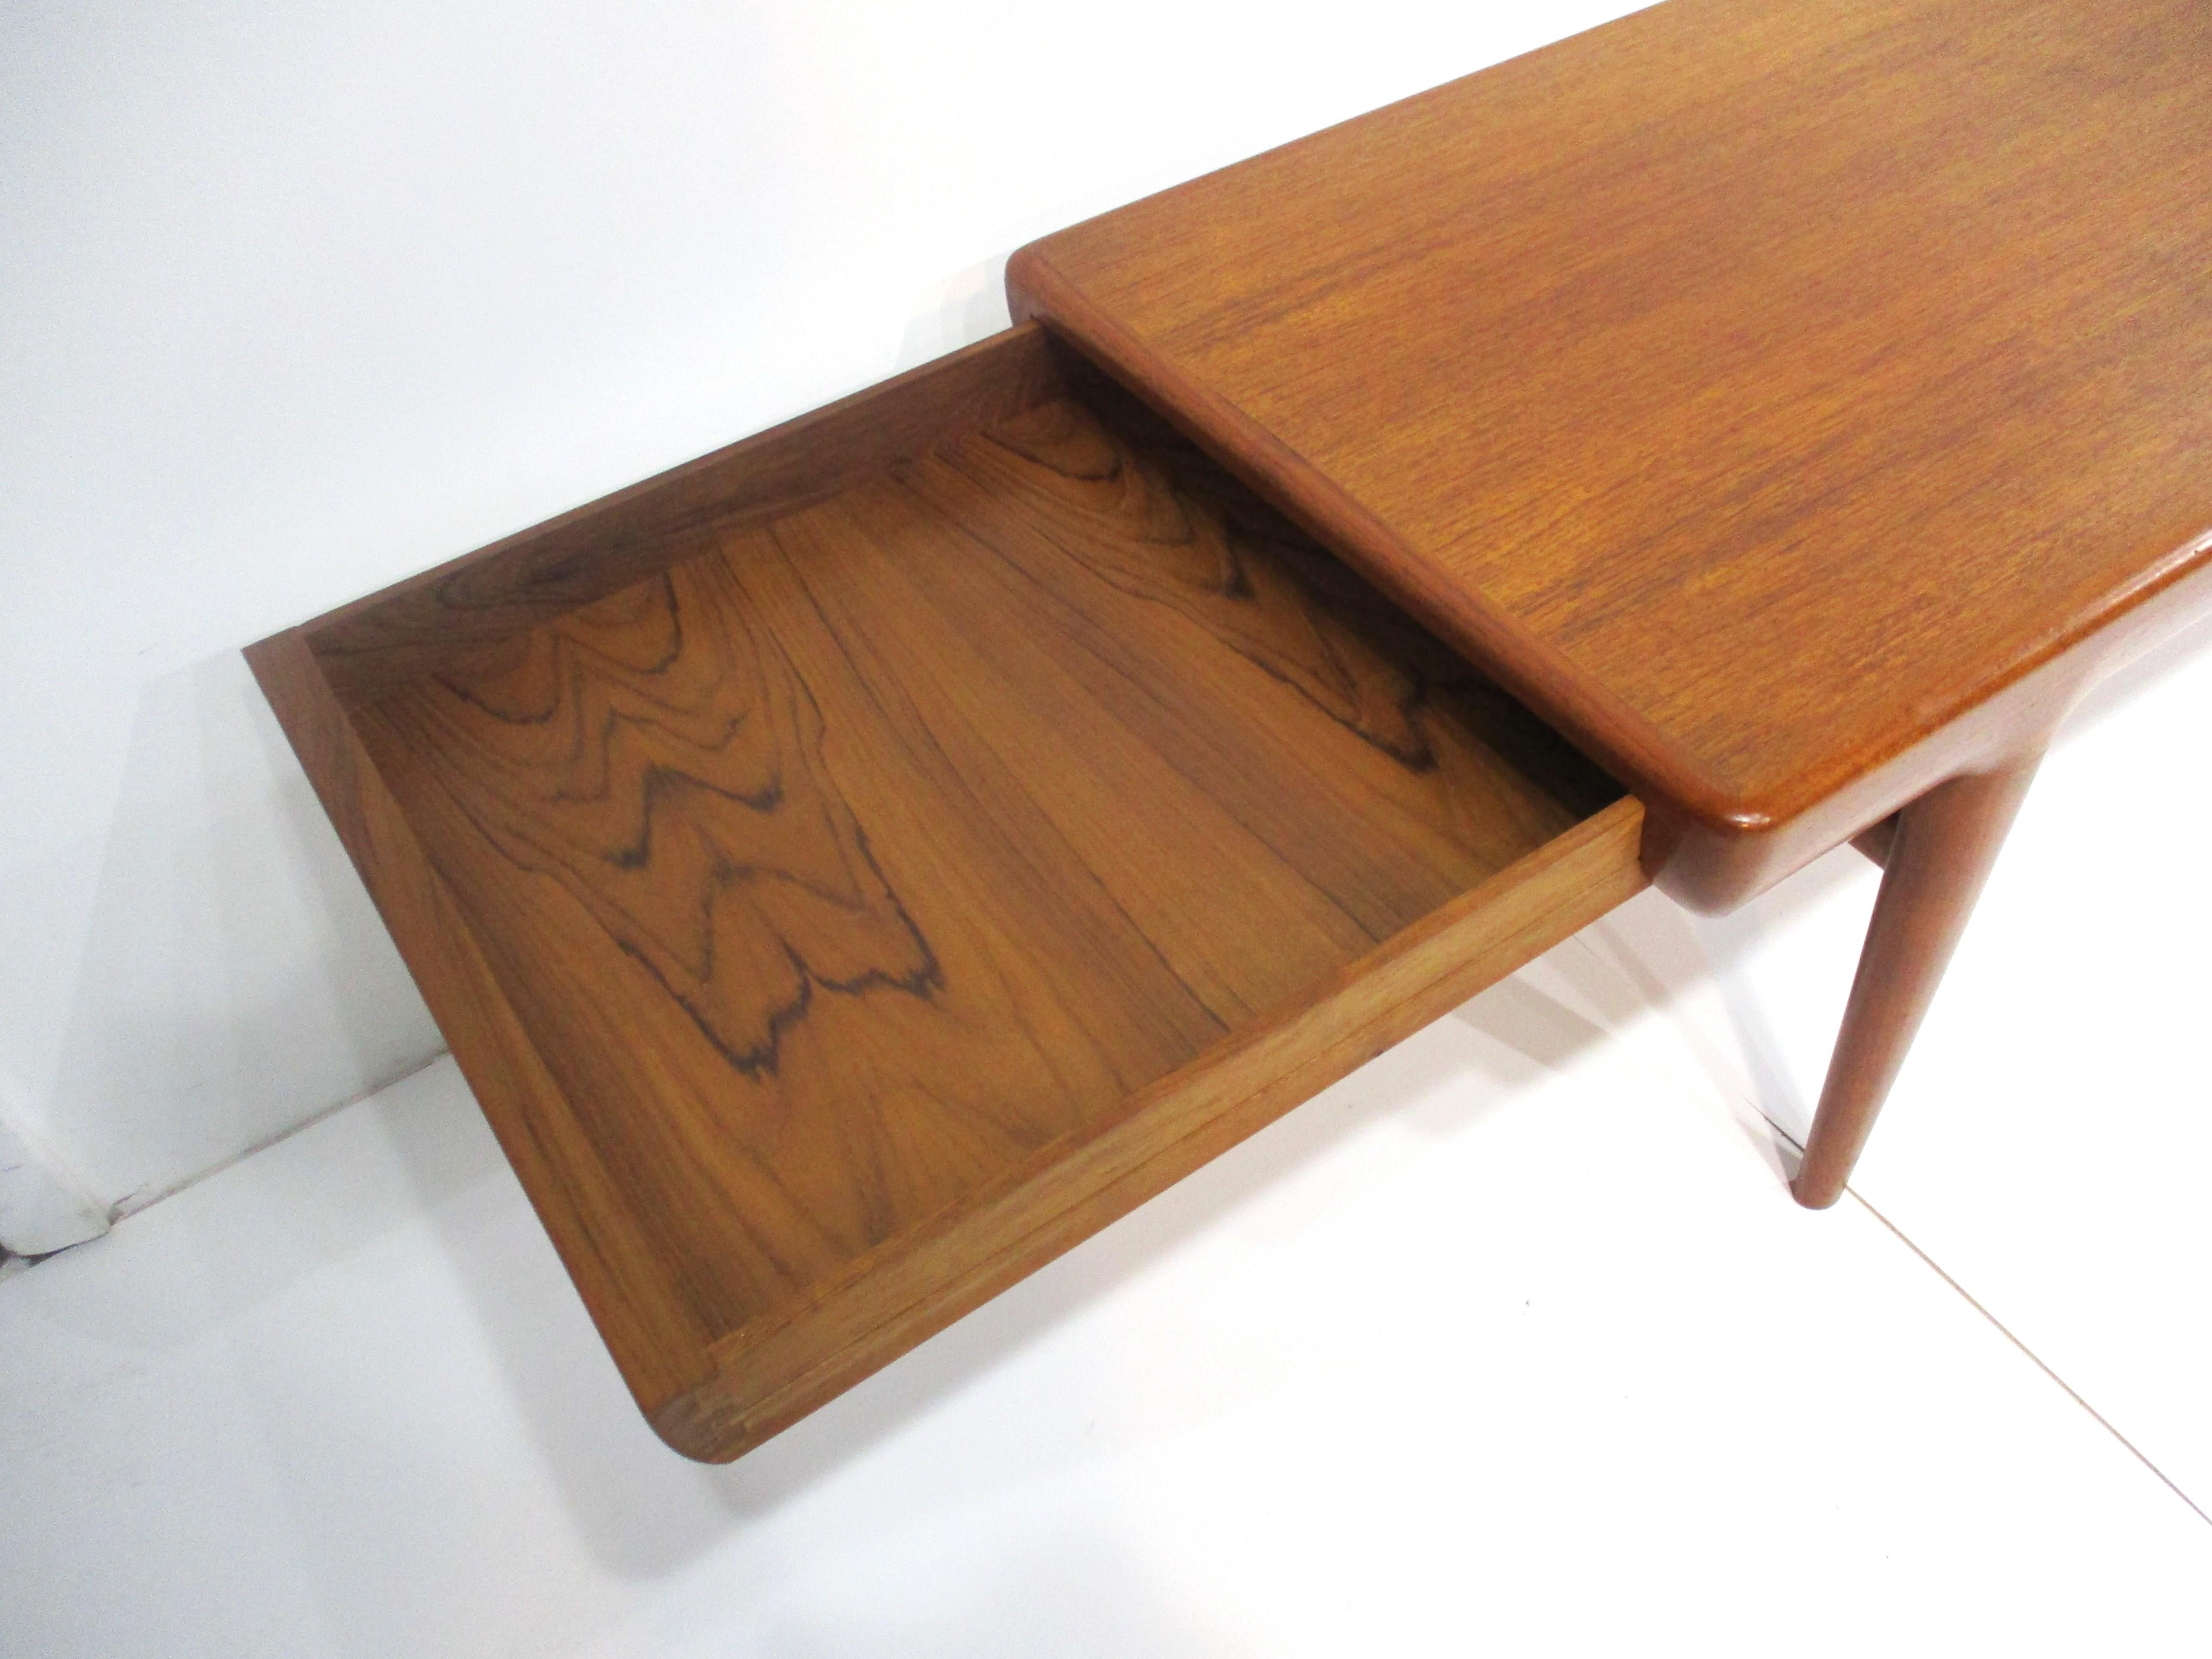 20th Century Teak Coffee Table w/ Pull Out Ends by Silkeborg -Johannes Andersen Denmark 